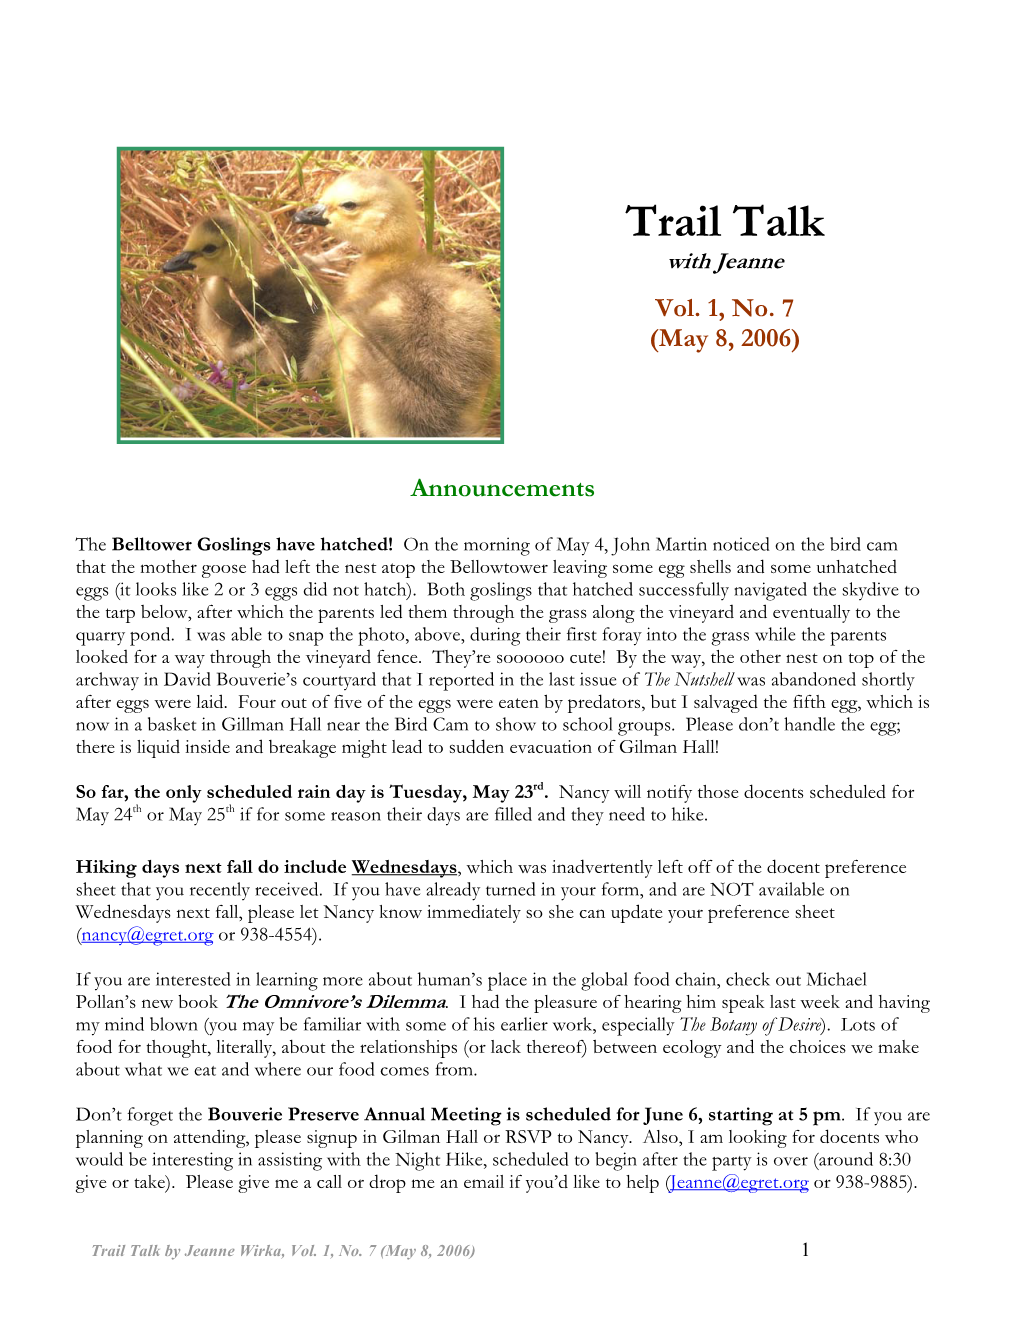 Trail Talk with Jeanne